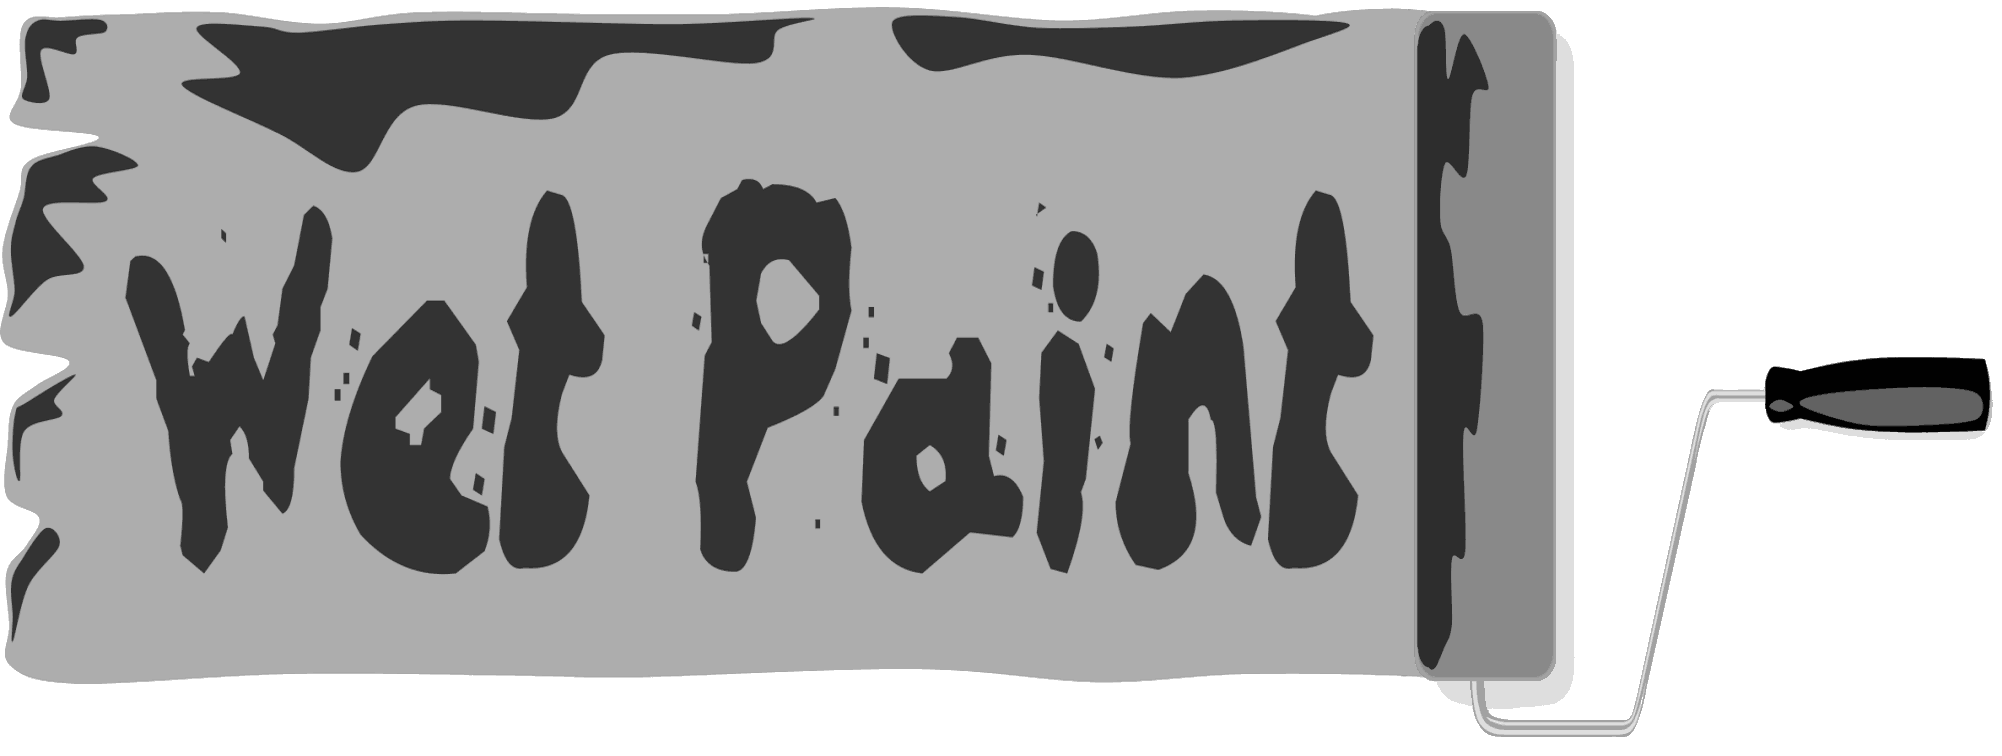 Wet Paint Sign 2 Pages   Http   Www Wpclipart Com Page Frames Full